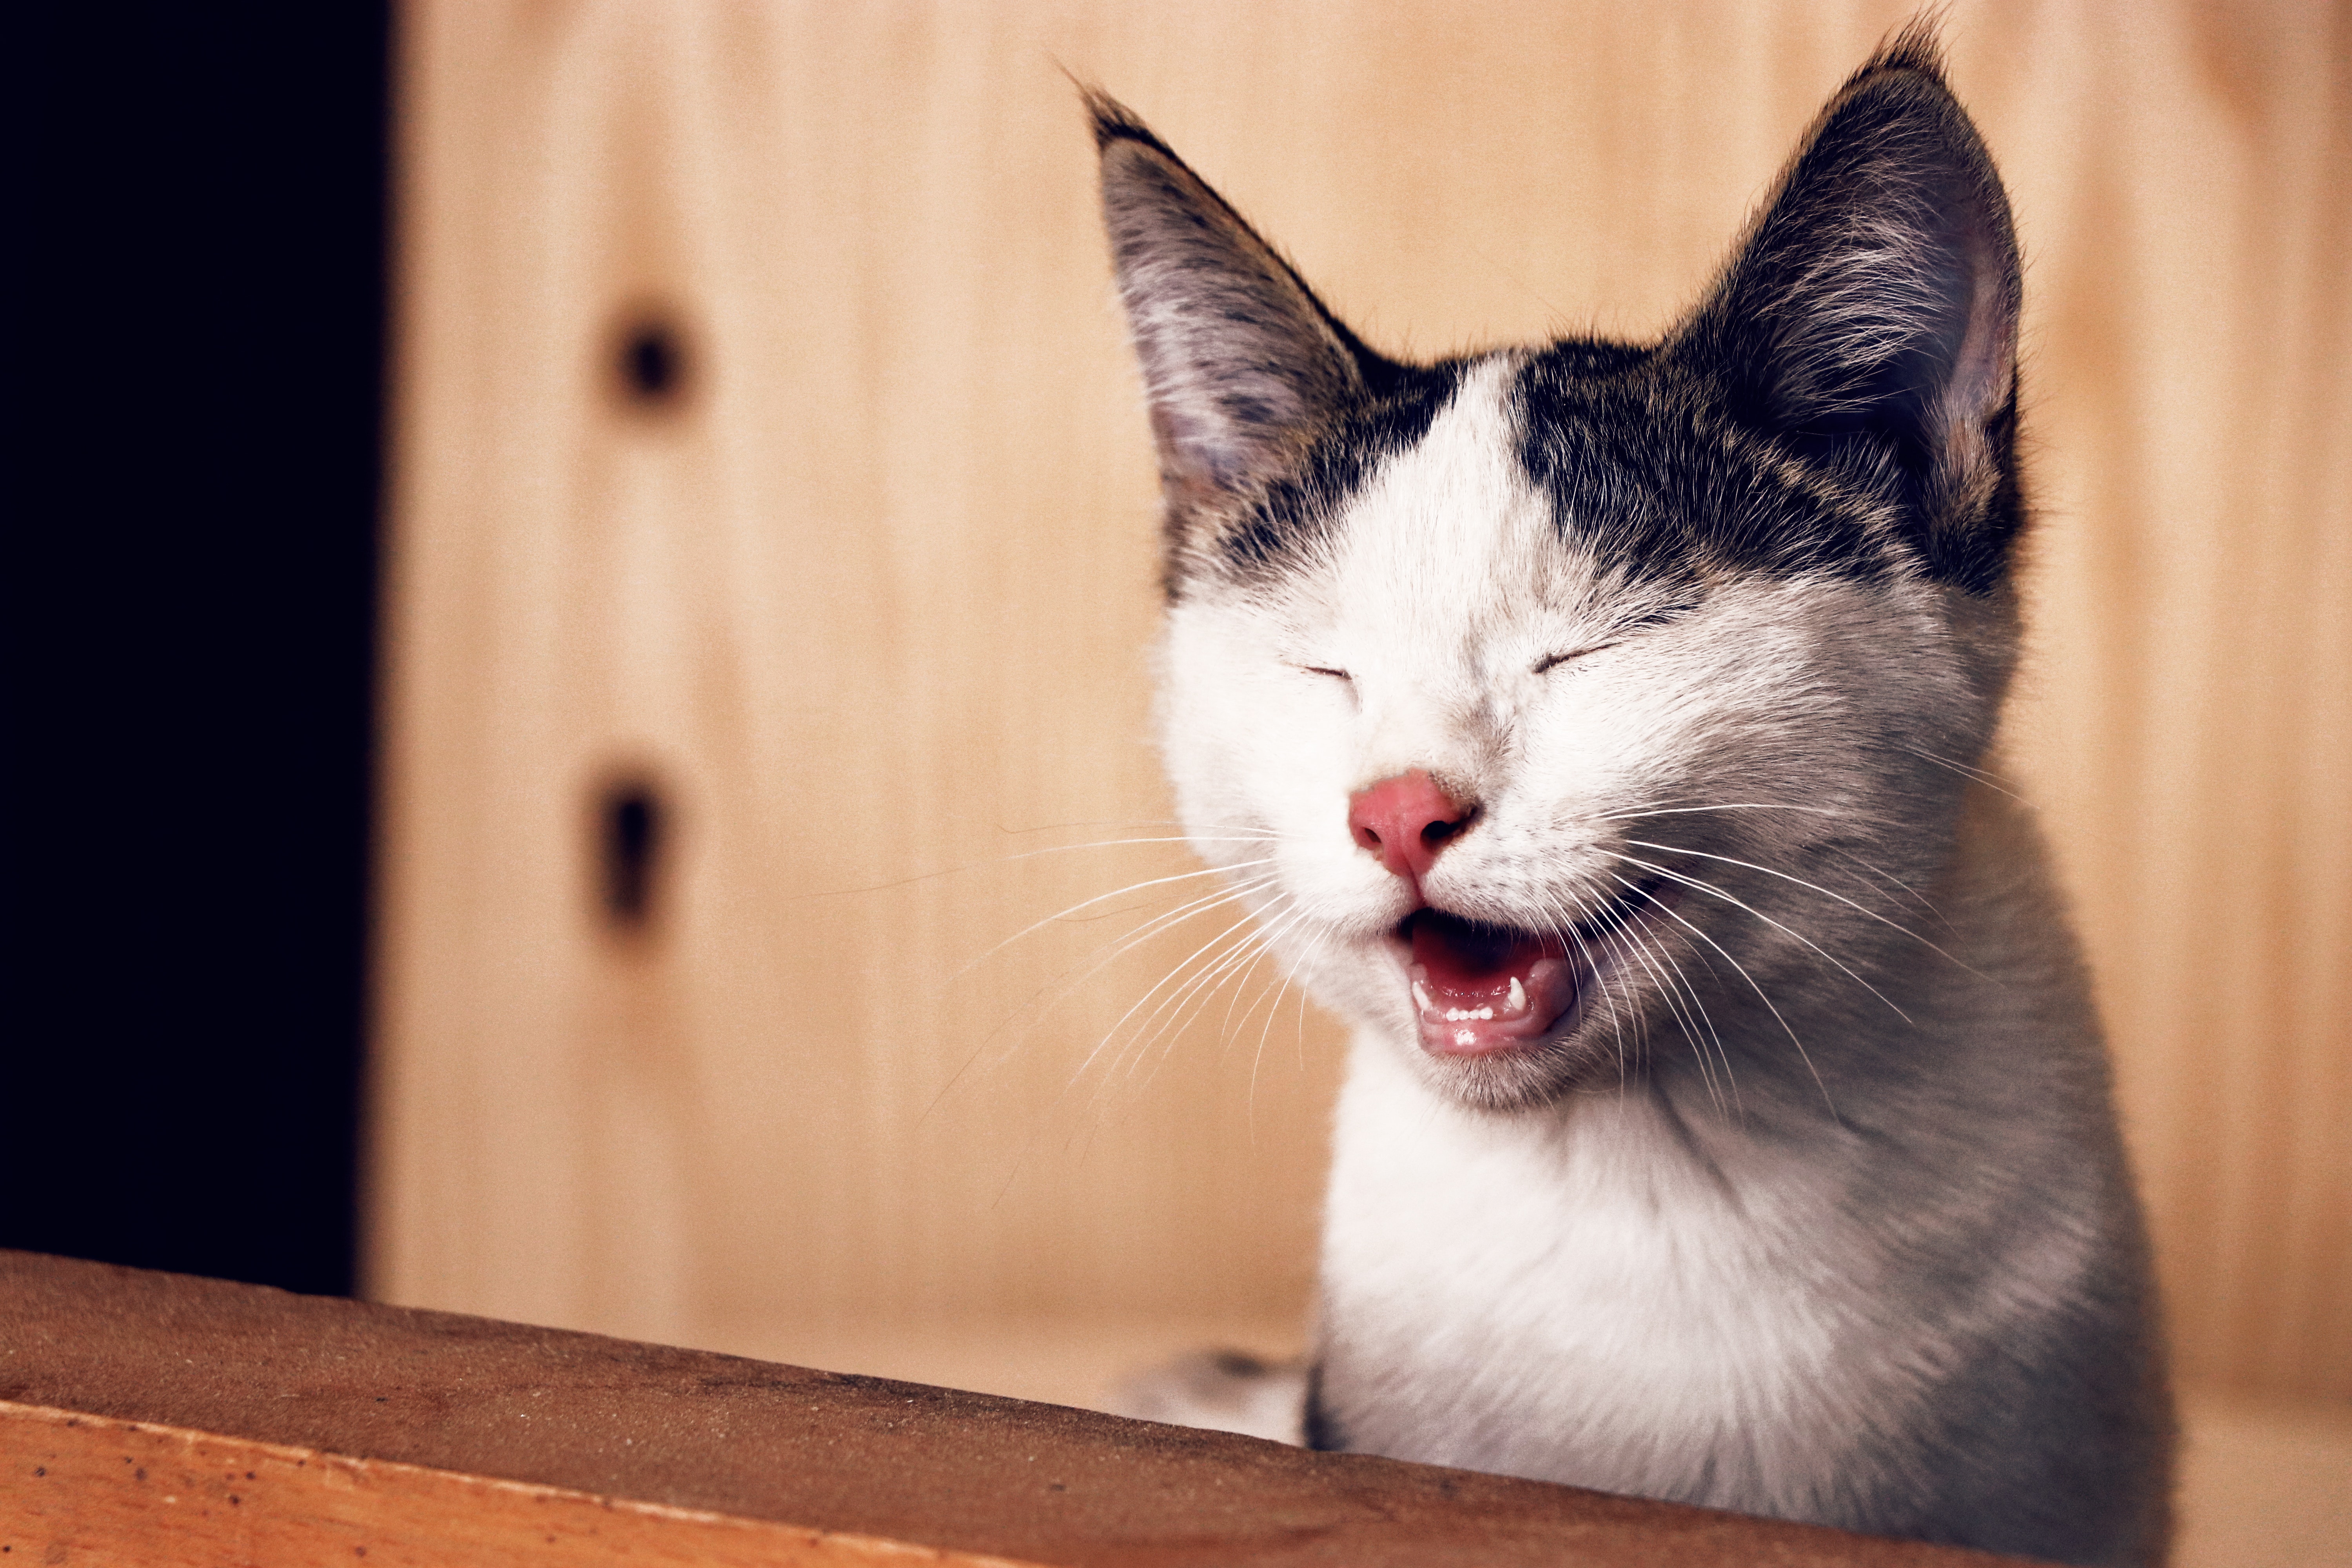 Decoding Our Feline’s Language: What Is My Cat Saying?